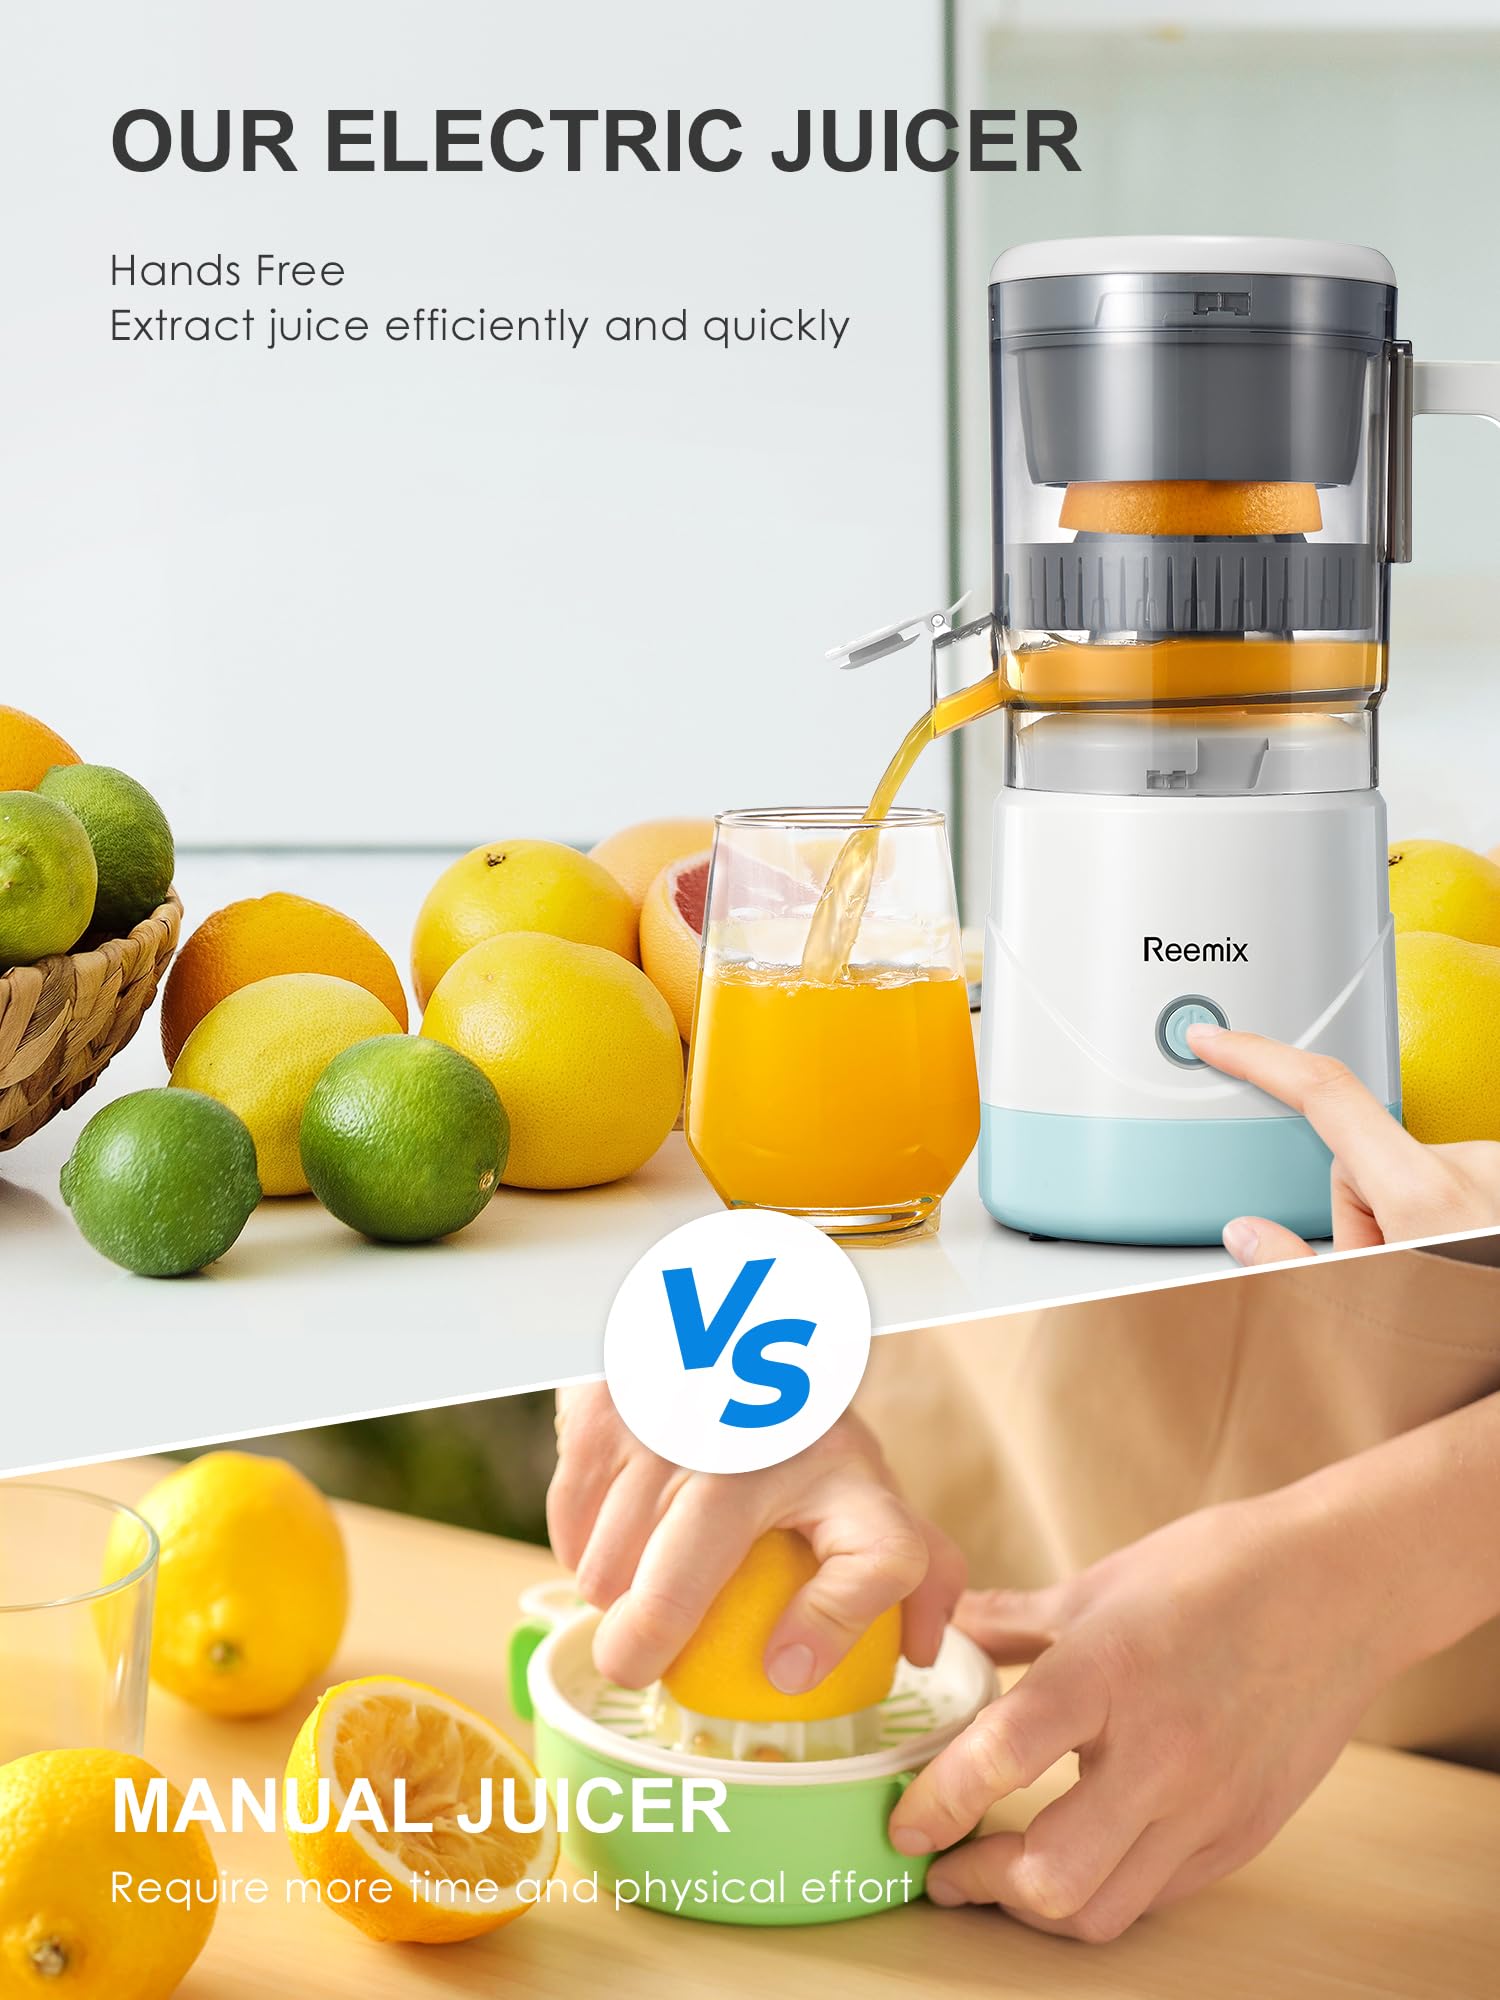 Electric Citrus Juicer, Reemix Full-Automatic Orange Juicer Squeezer for Orange, Lemon, Grapefruit, Citrus Juicer with Cleaning Brush, Easy to Clean and Use (White)